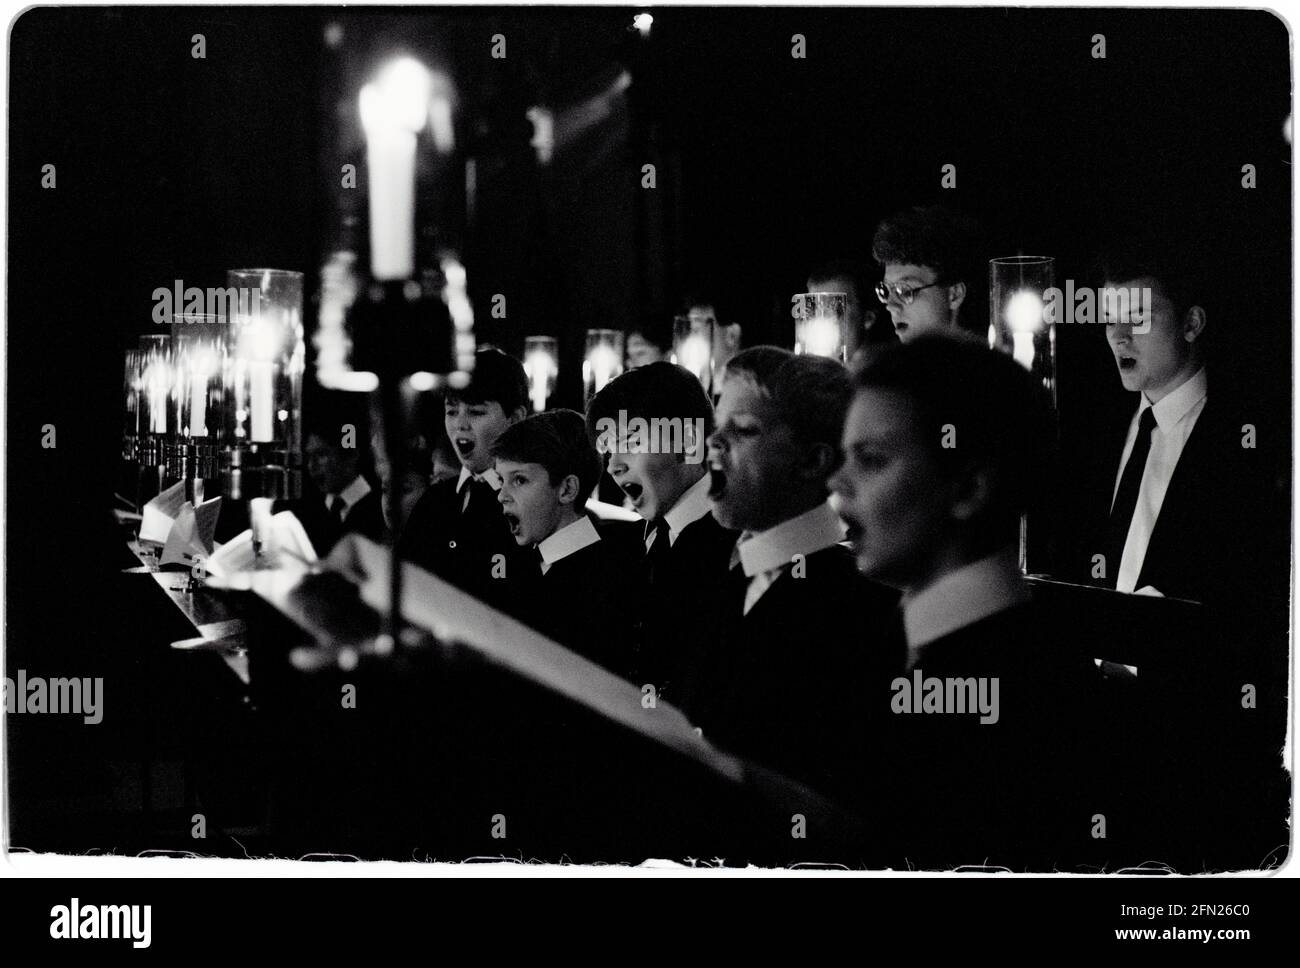 Kings College Chapel Choir December 1992 scanned 2021 Photographed in the lead up to the traditional Festival of Nine Carols in King’s College under the musical directorship of Stephen Cleobury, later Sir Stephen. Sire Stephen died in 2019. Sir Stephen John Cleobury CBE  was an English organist and music director. He worked with the Choir of King's College, Cambridge, where he served as music director from 1982 to 2019 The Choir of King's College, Cambridge is an English choir. It is considered one of today's most accomplished and renowned representatives of the great English choral tradition. Stock Photo